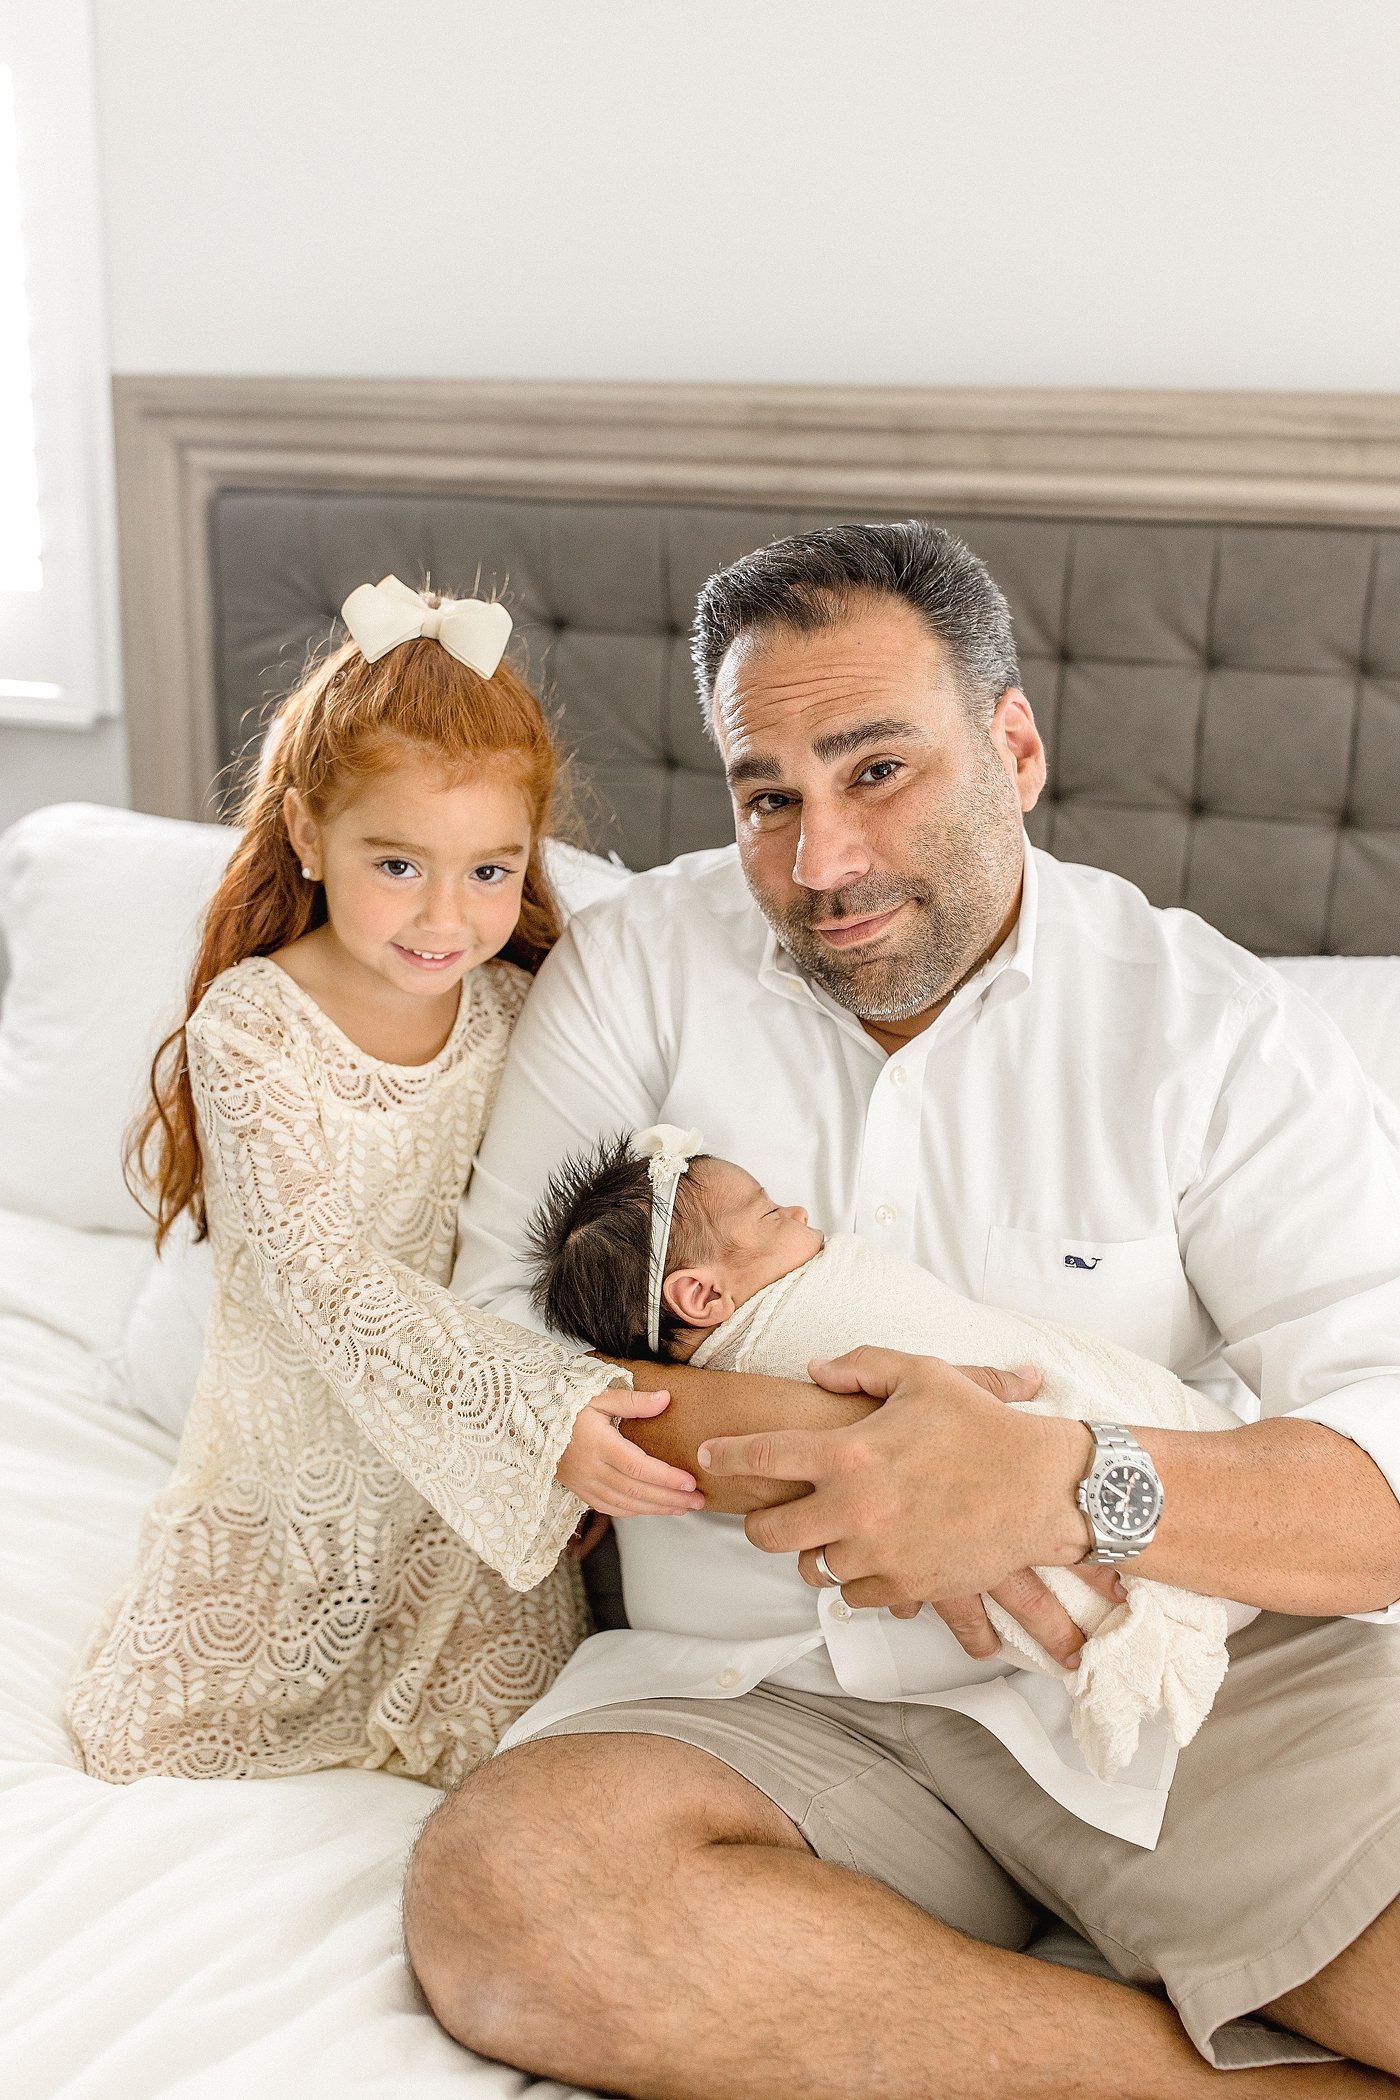 Dad and his two daughters during newborn photos. Photo by Ivanna Vidal Photography.